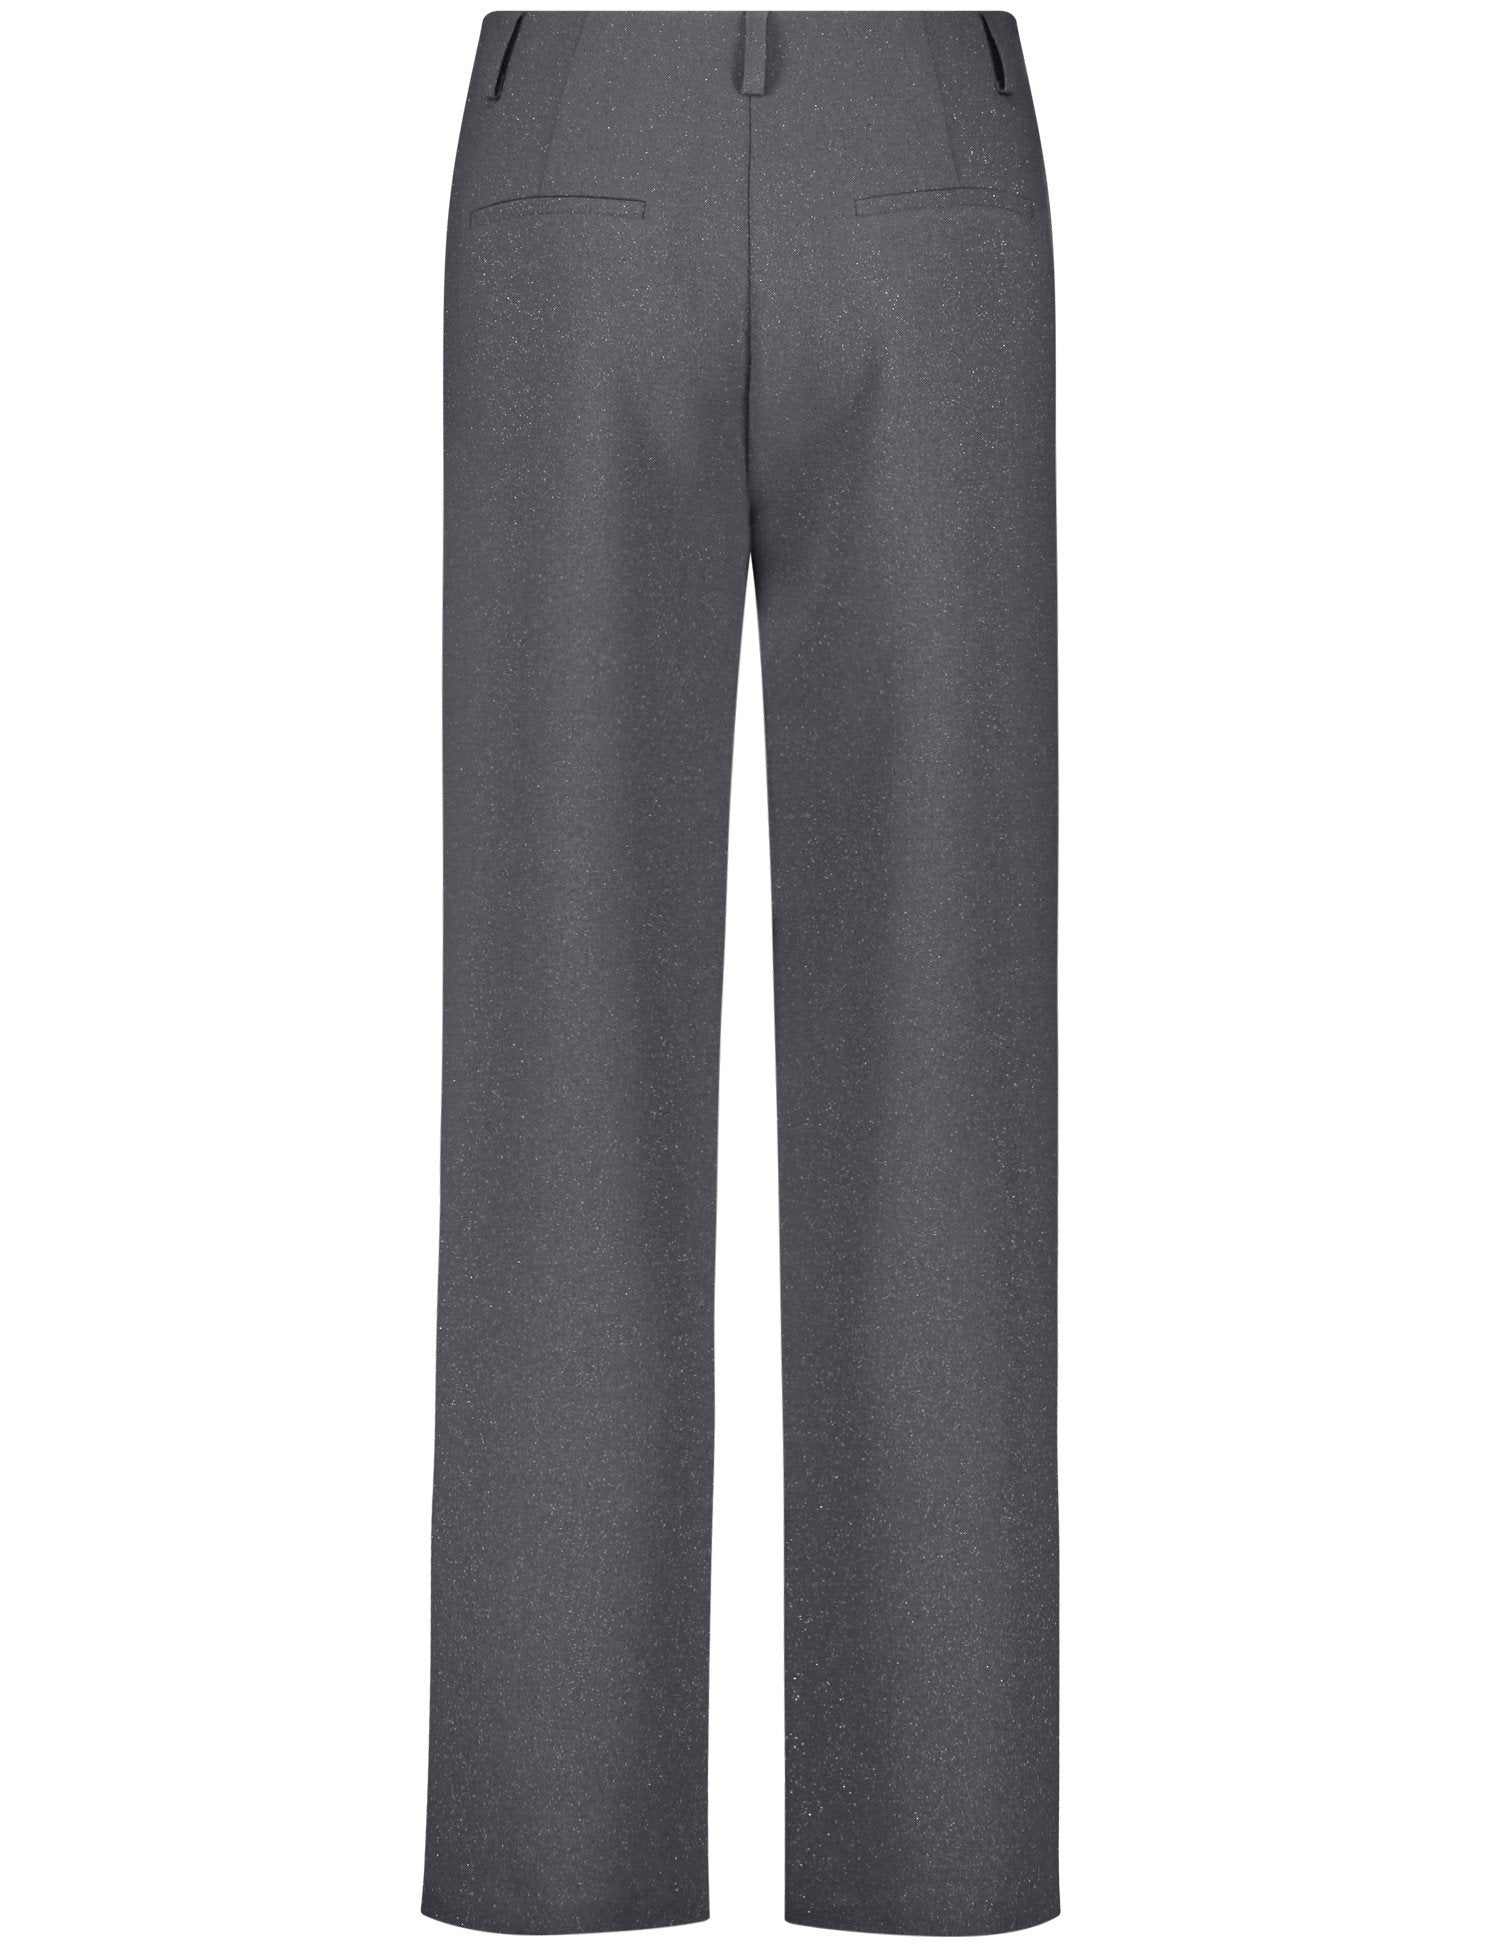 Wide-Leg Trousers With Added Stretch For Comfort_420432-11351_2210_03